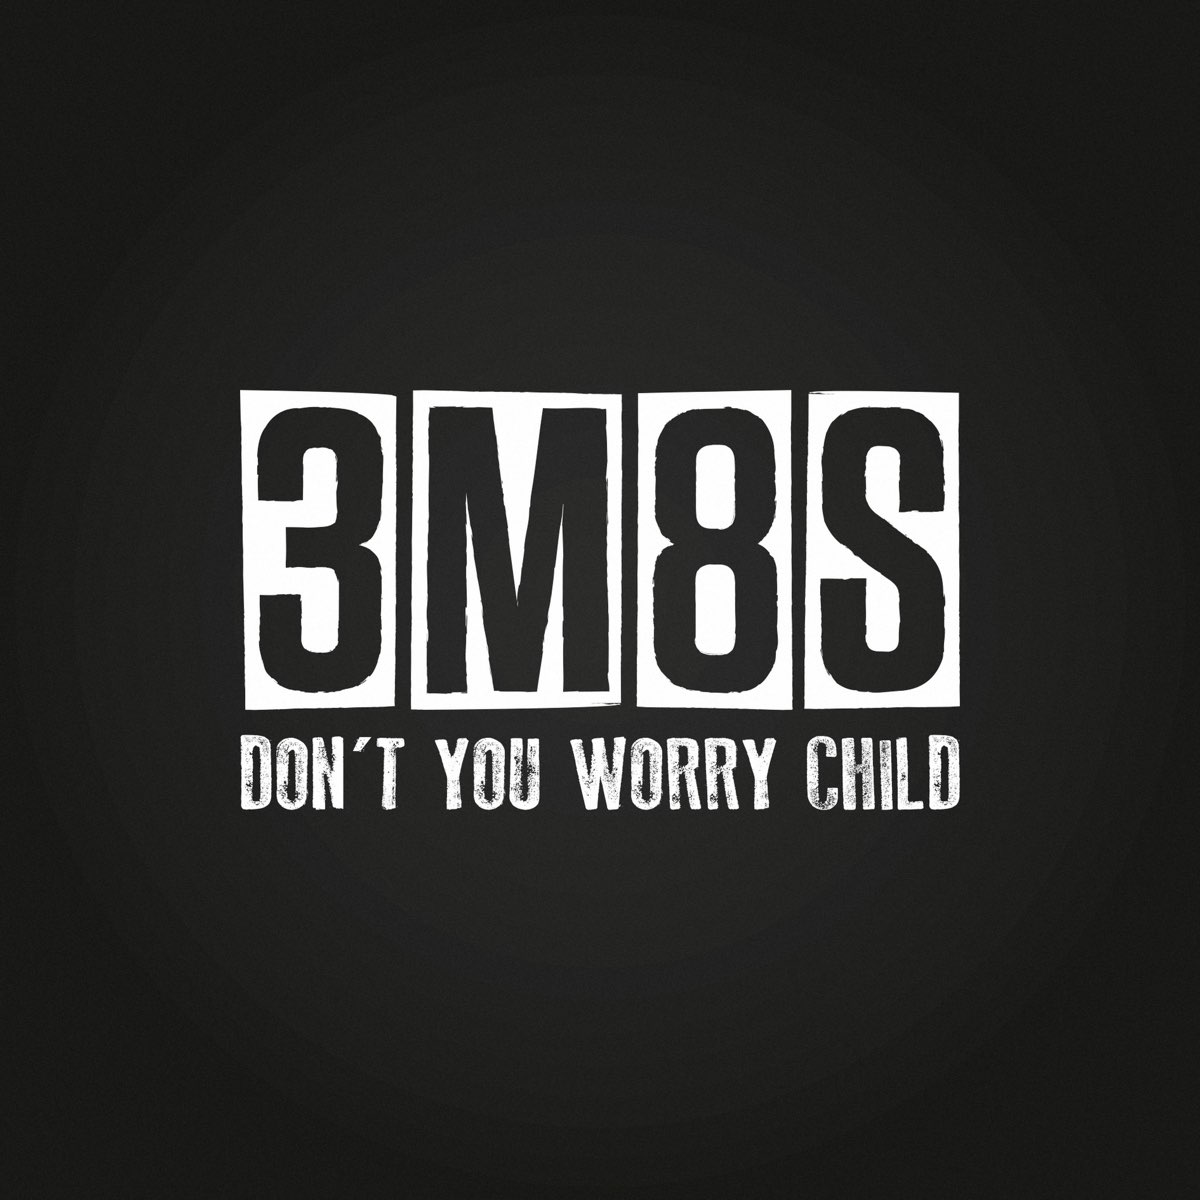 New don t you worry. Don't you worry child. Don't you. Dont you worry don't. 00s Music.